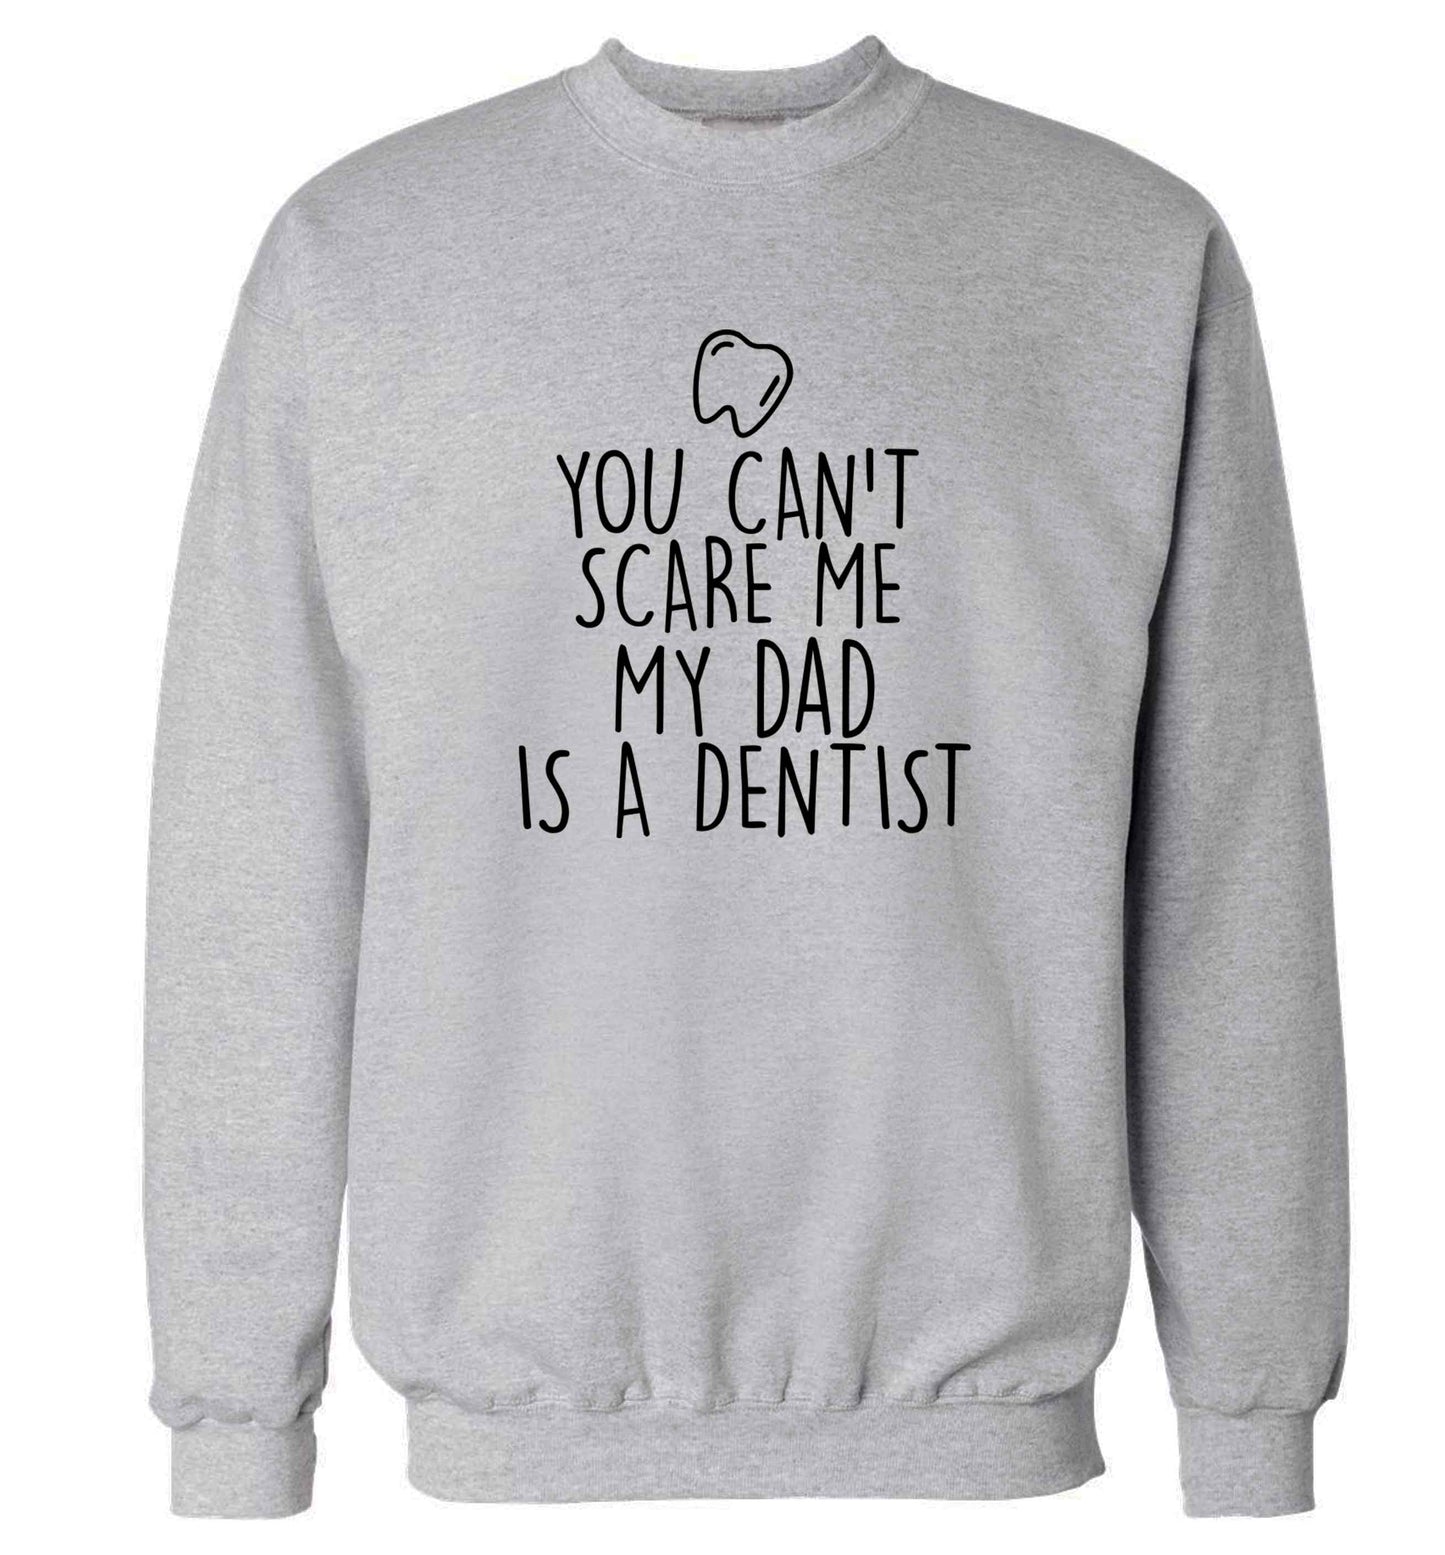 You can't scare me my dad is a dentist adult's unisex grey sweater 2XL